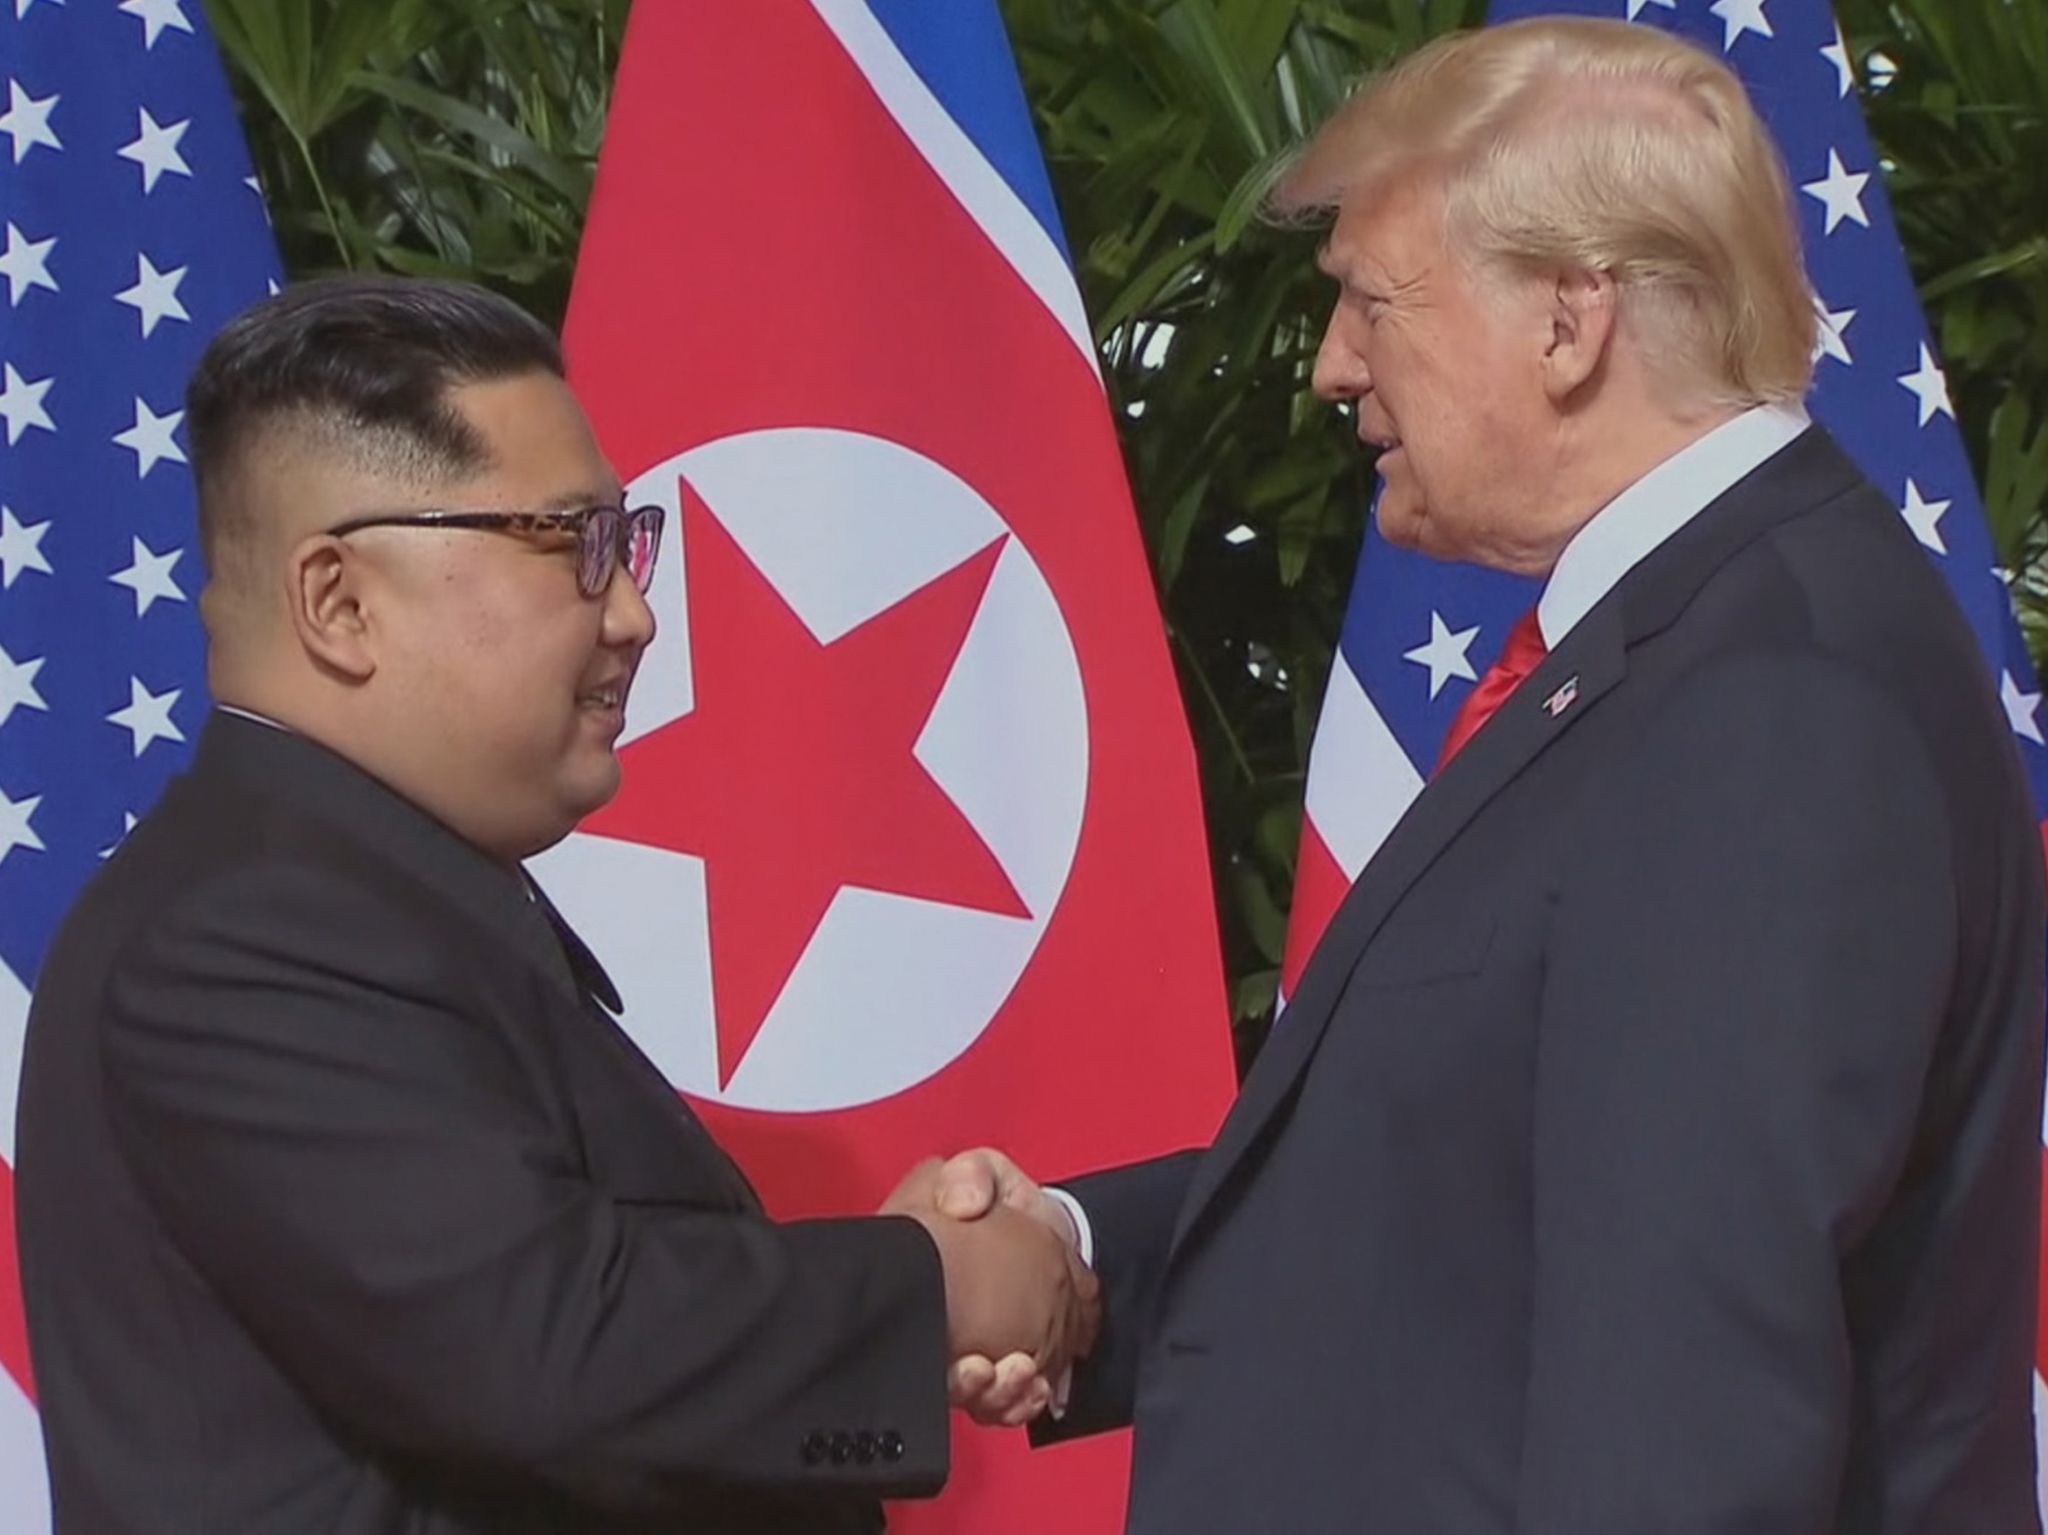 President Donald Trump and North Korean leader Kim Jong-un shake hands at the Singapore Summit... [Photo of the day - February 2021]